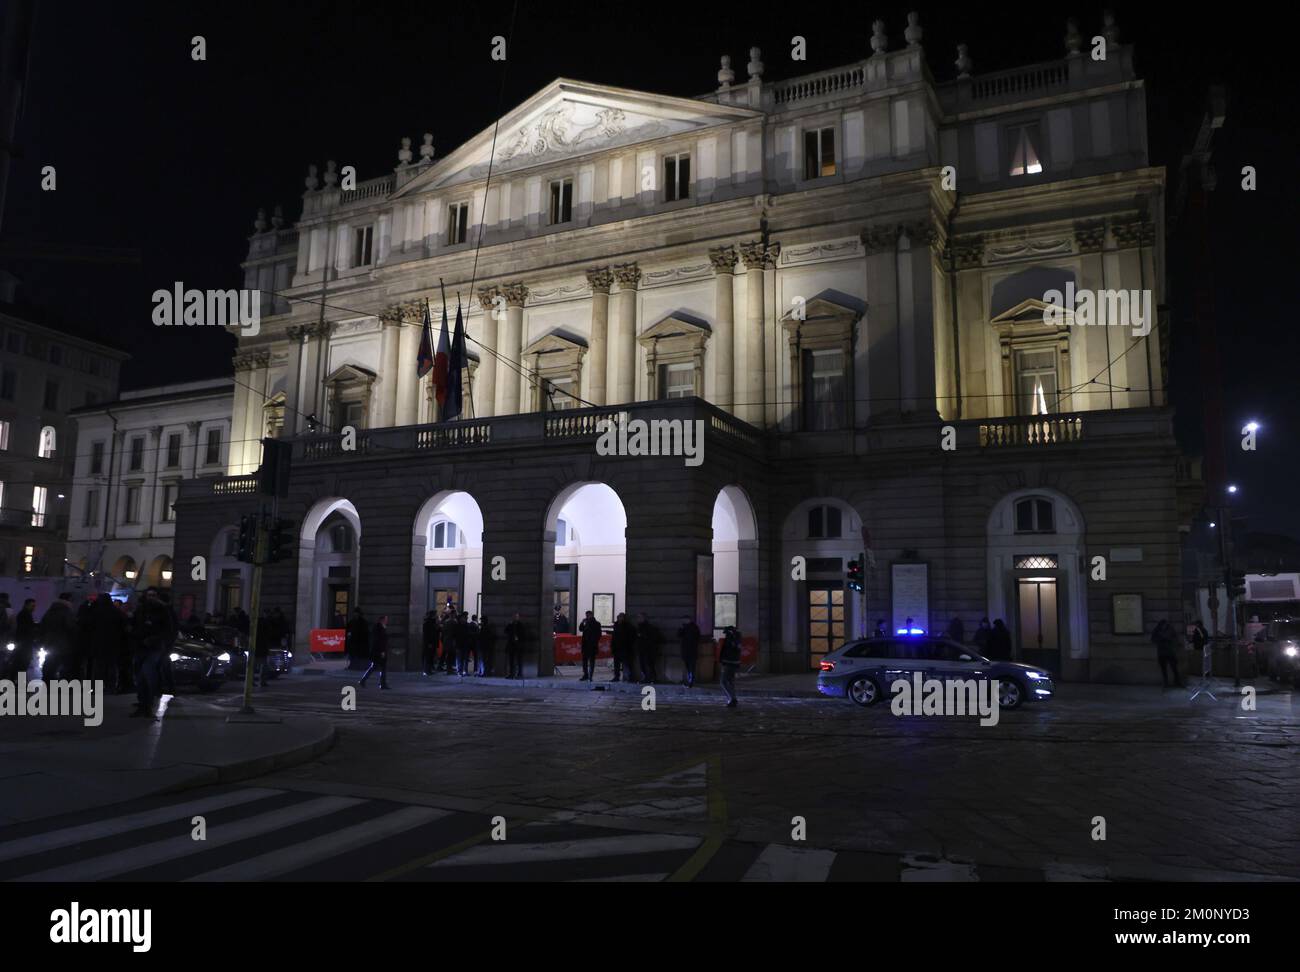 December 7, 2022, MILAN, ITALY: An external view of the Teatro alla Scala  on the occasion of the La Scala opera housesâ€™ season opener, in Milan,  Italy, 07 December 2022. The Scala